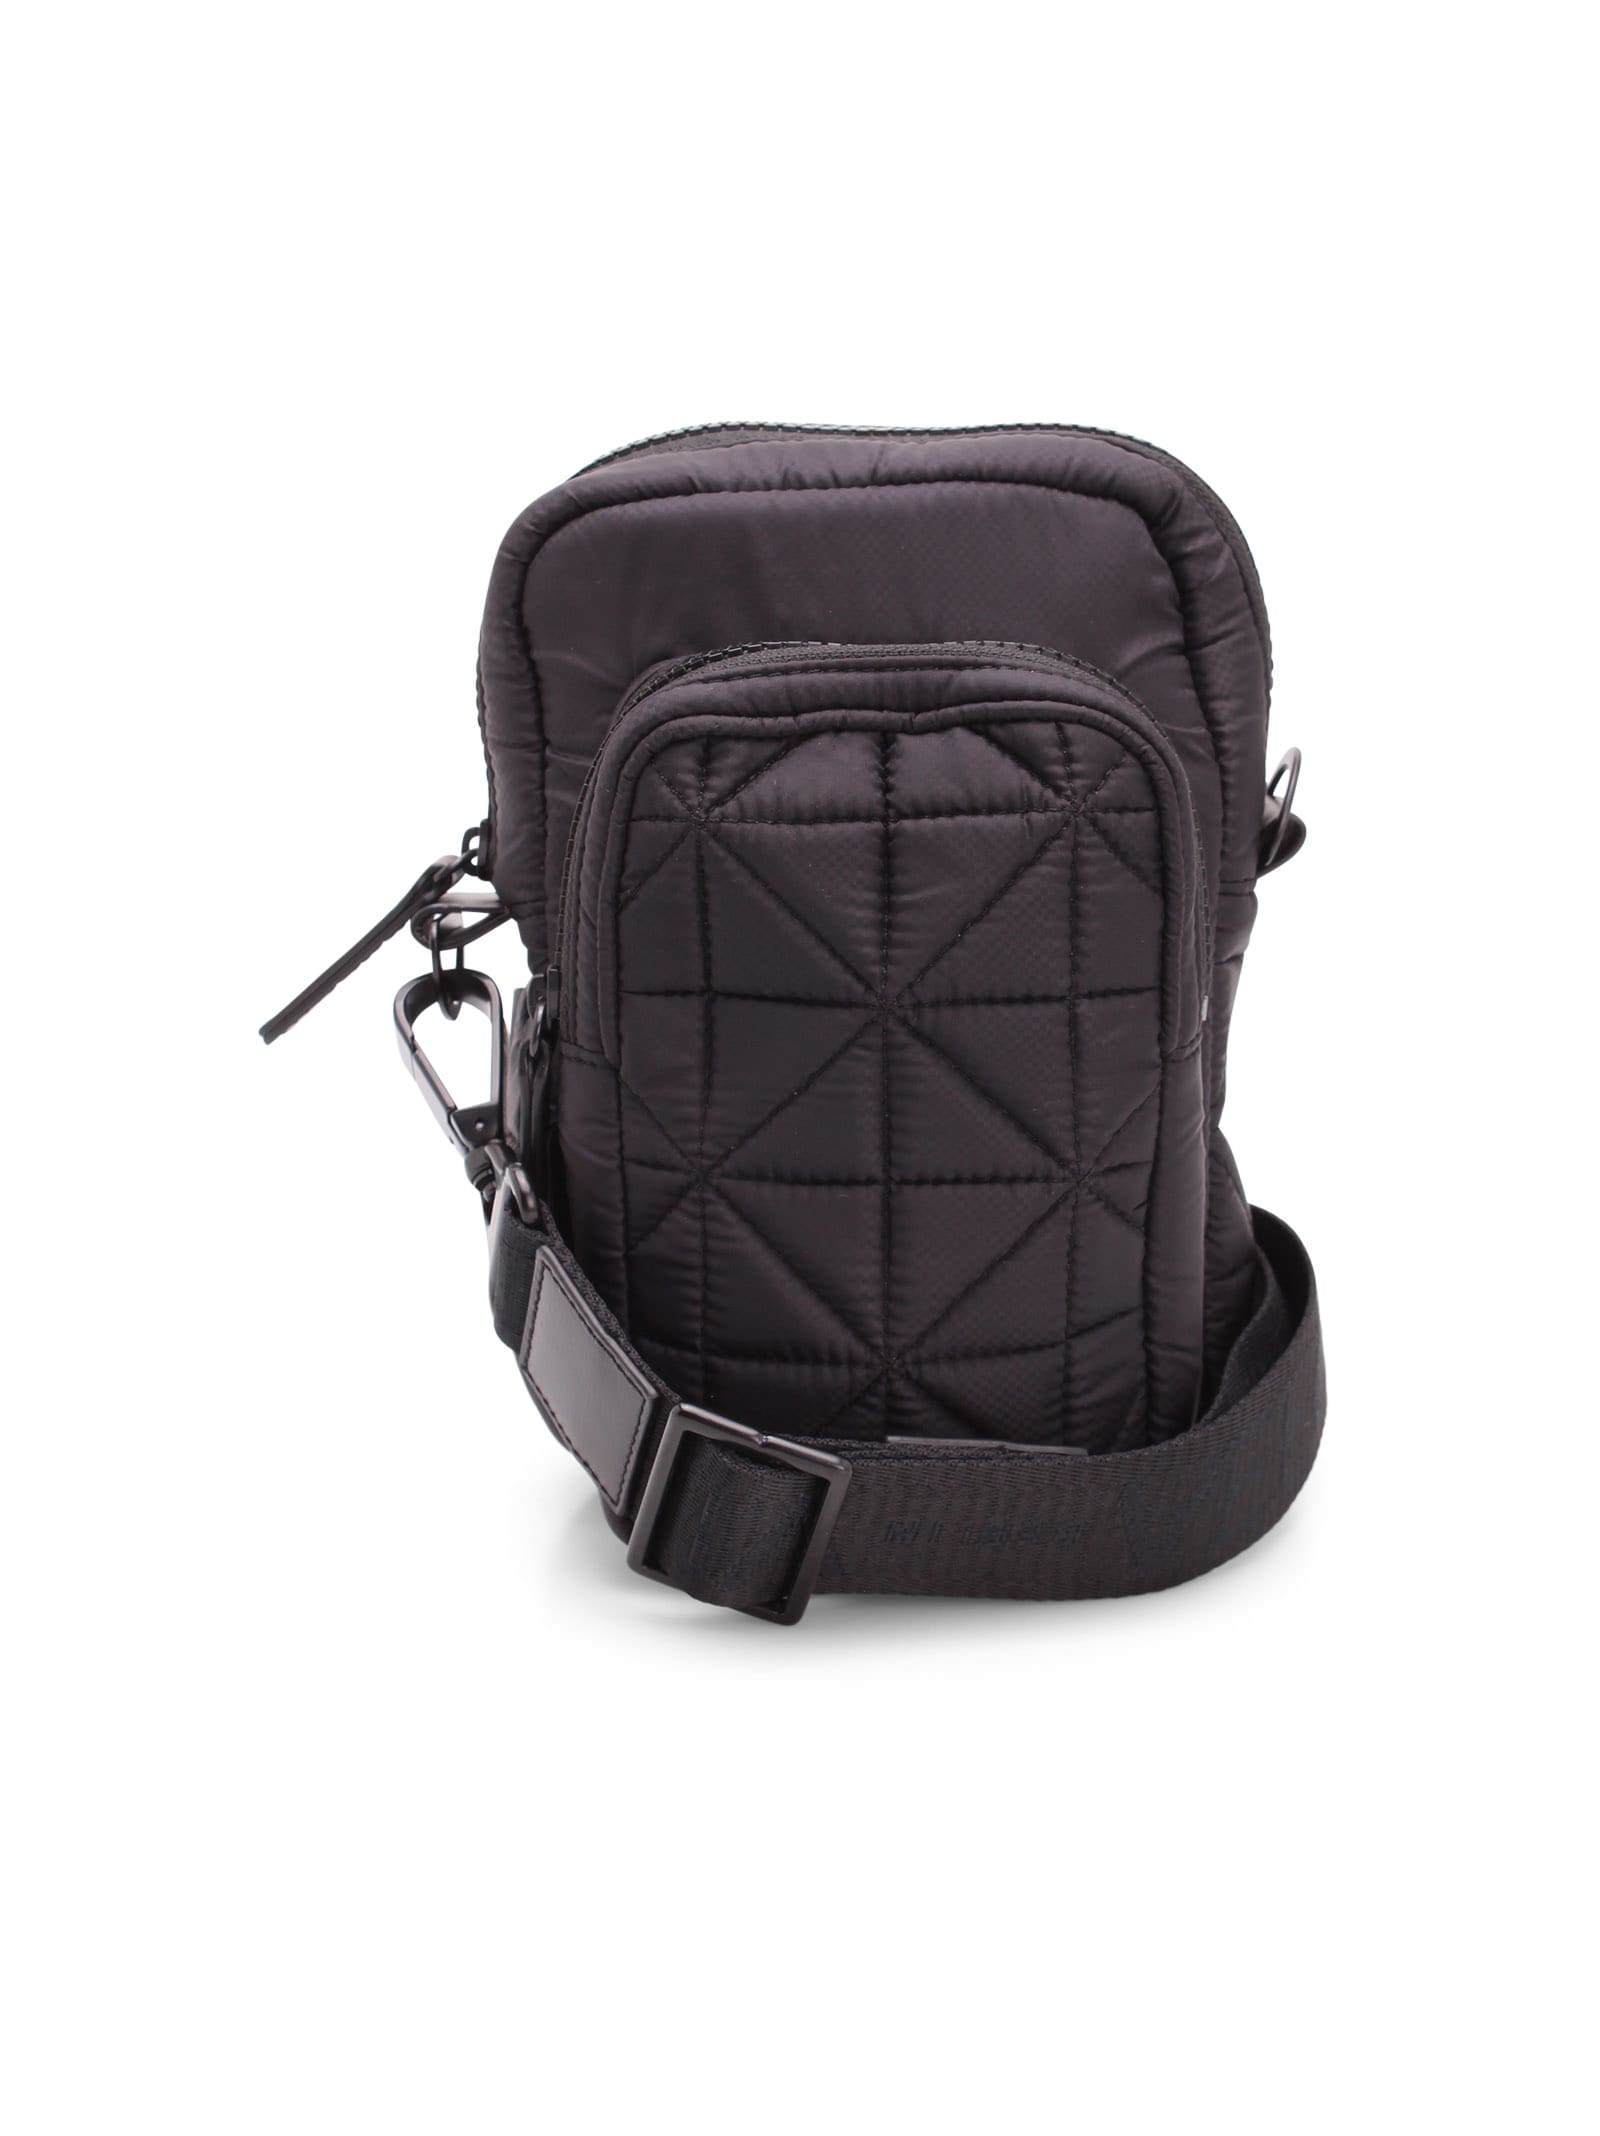 VeeCollective Vee Collective airliner Small Nylon Shoulder Bag